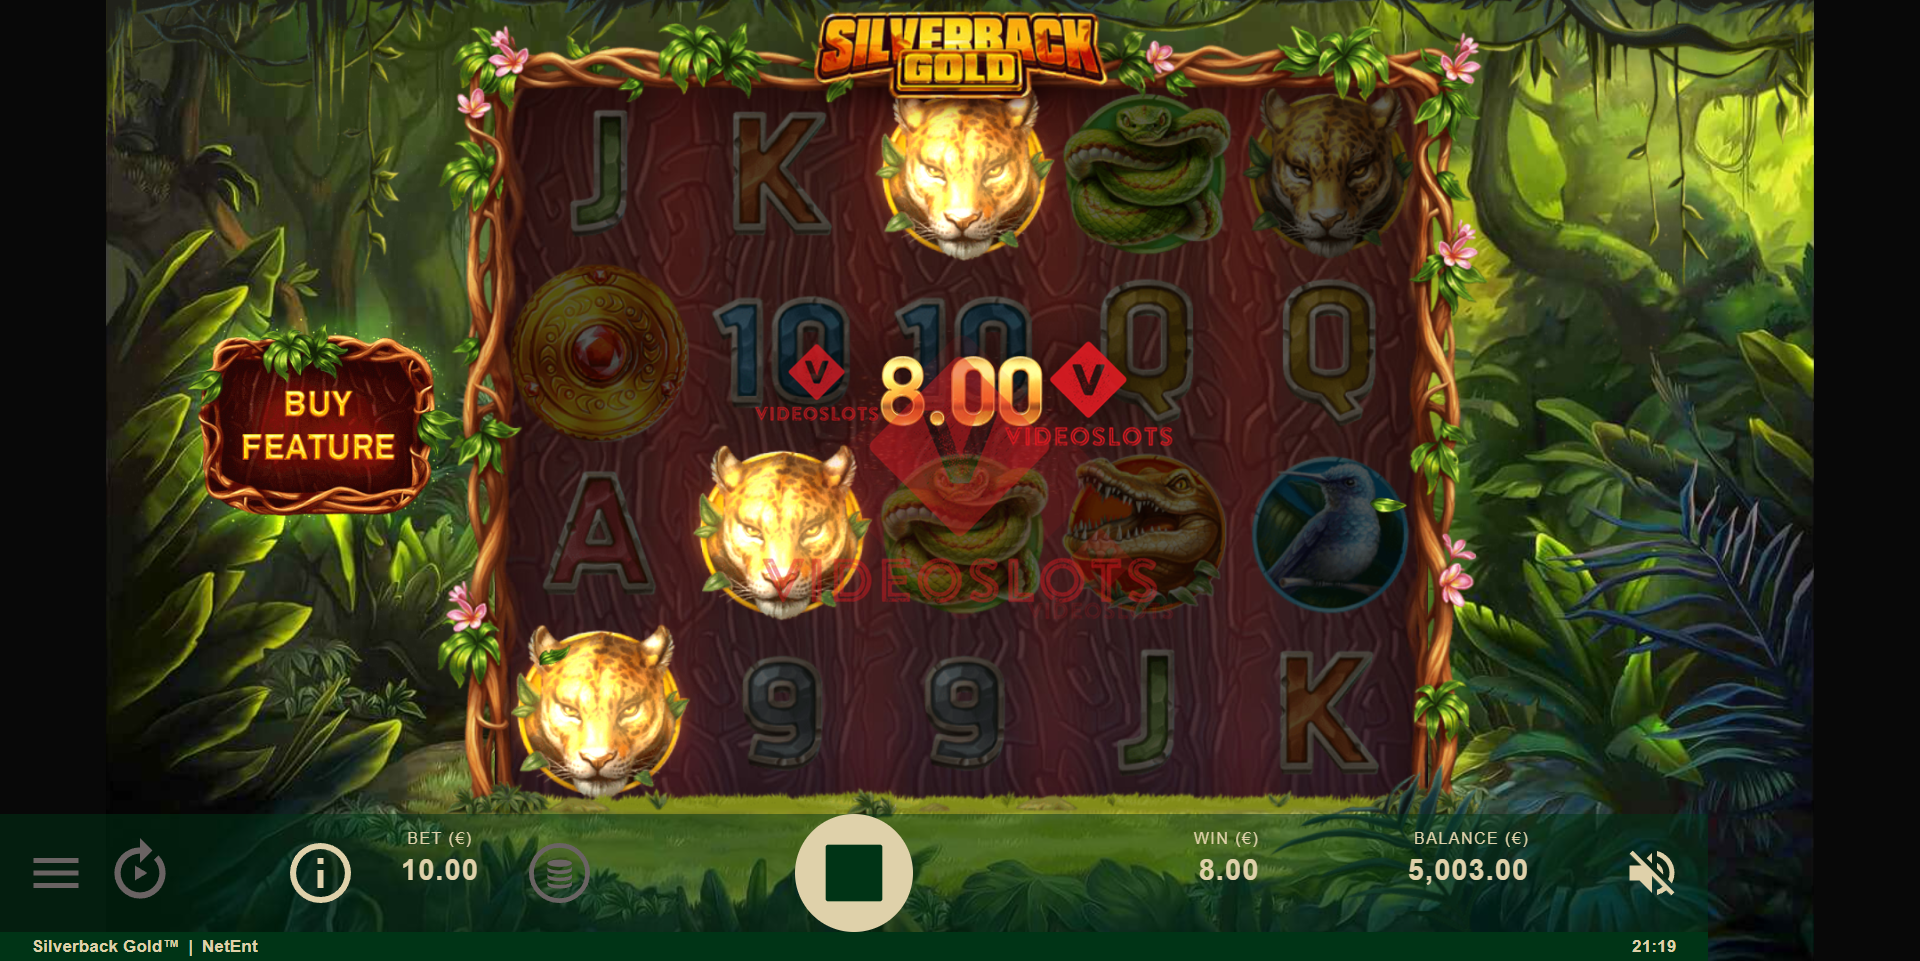 Base Game for Silverback Gold slot from NetEnt